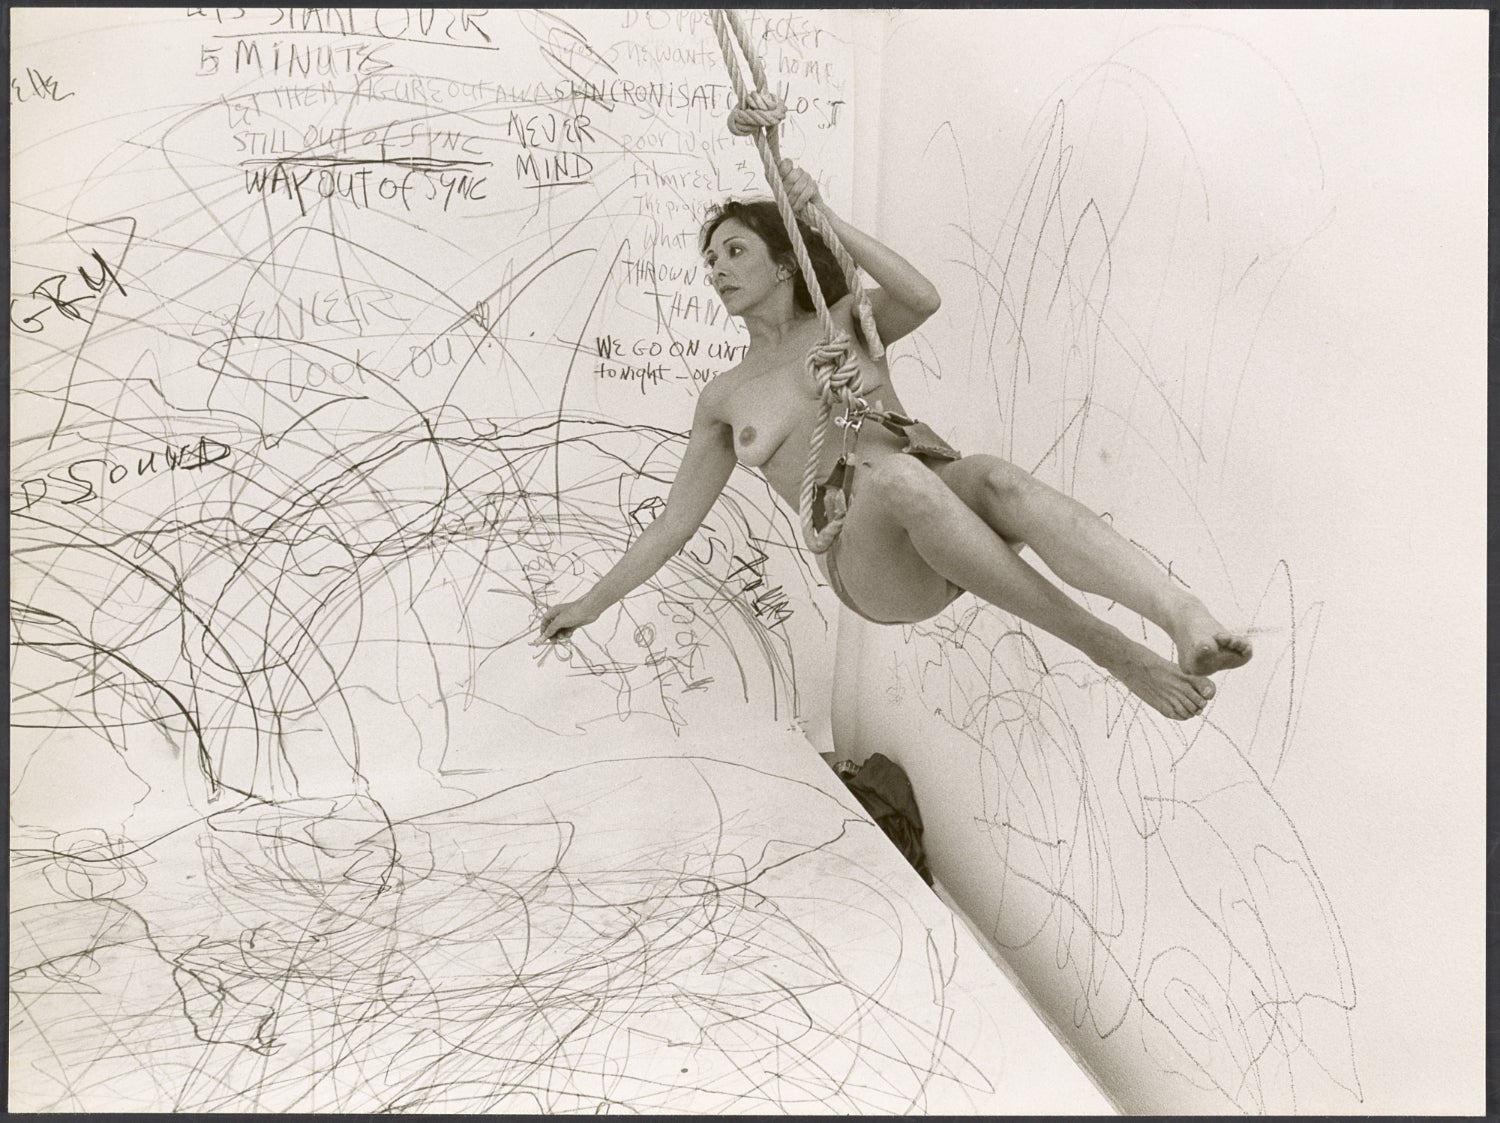 Carolee Schneemann, ‘Up to and Including Her Limits’, 10 June 1976 Studiogalerie, Berlin